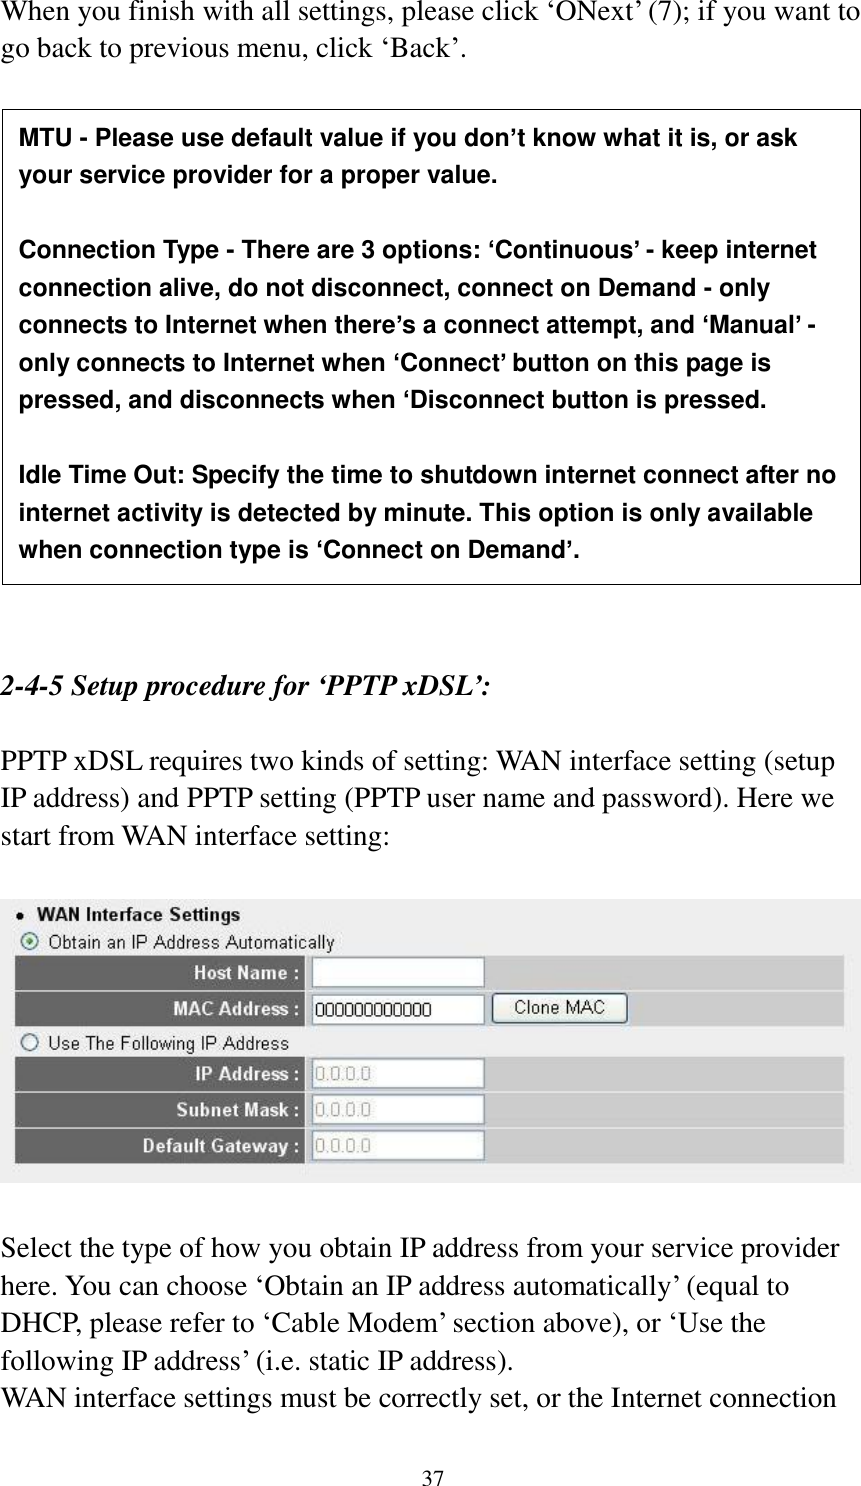 37 When you finish with all settings, please click „ONext‟ (7); if you want to go back to previous menu, click „Back‟.                   2-4-5 Setup procedure for ‘PPTP xDSL’:  PPTP xDSL requires two kinds of setting: WAN interface setting (setup IP address) and PPTP setting (PPTP user name and password). Here we start from WAN interface setting:    Select the type of how you obtain IP address from your service provider here. You can choose „Obtain an IP address automatically‟ (equal to DHCP, please refer to „Cable Modem‟ section above), or „Use the following IP address‟ (i.e. static IP address).   WAN interface settings must be correctly set, or the Internet connection MTU - Please use default value if you don’t know what it is, or ask your service provider for a proper value.  Connection Type - There are 3 options: ‘Continuous’ - keep internet connection alive, do not disconnect, connect on Demand - only connects to Internet when there’s a connect attempt, and ‘Manual’ - only connects to Internet when ‘Connect’ button on this page is pressed, and disconnects when ‘Disconnect button is pressed.  Idle Time Out: Specify the time to shutdown internet connect after no internet activity is detected by minute. This option is only available when connection type is ‘Connect on Demand’. 